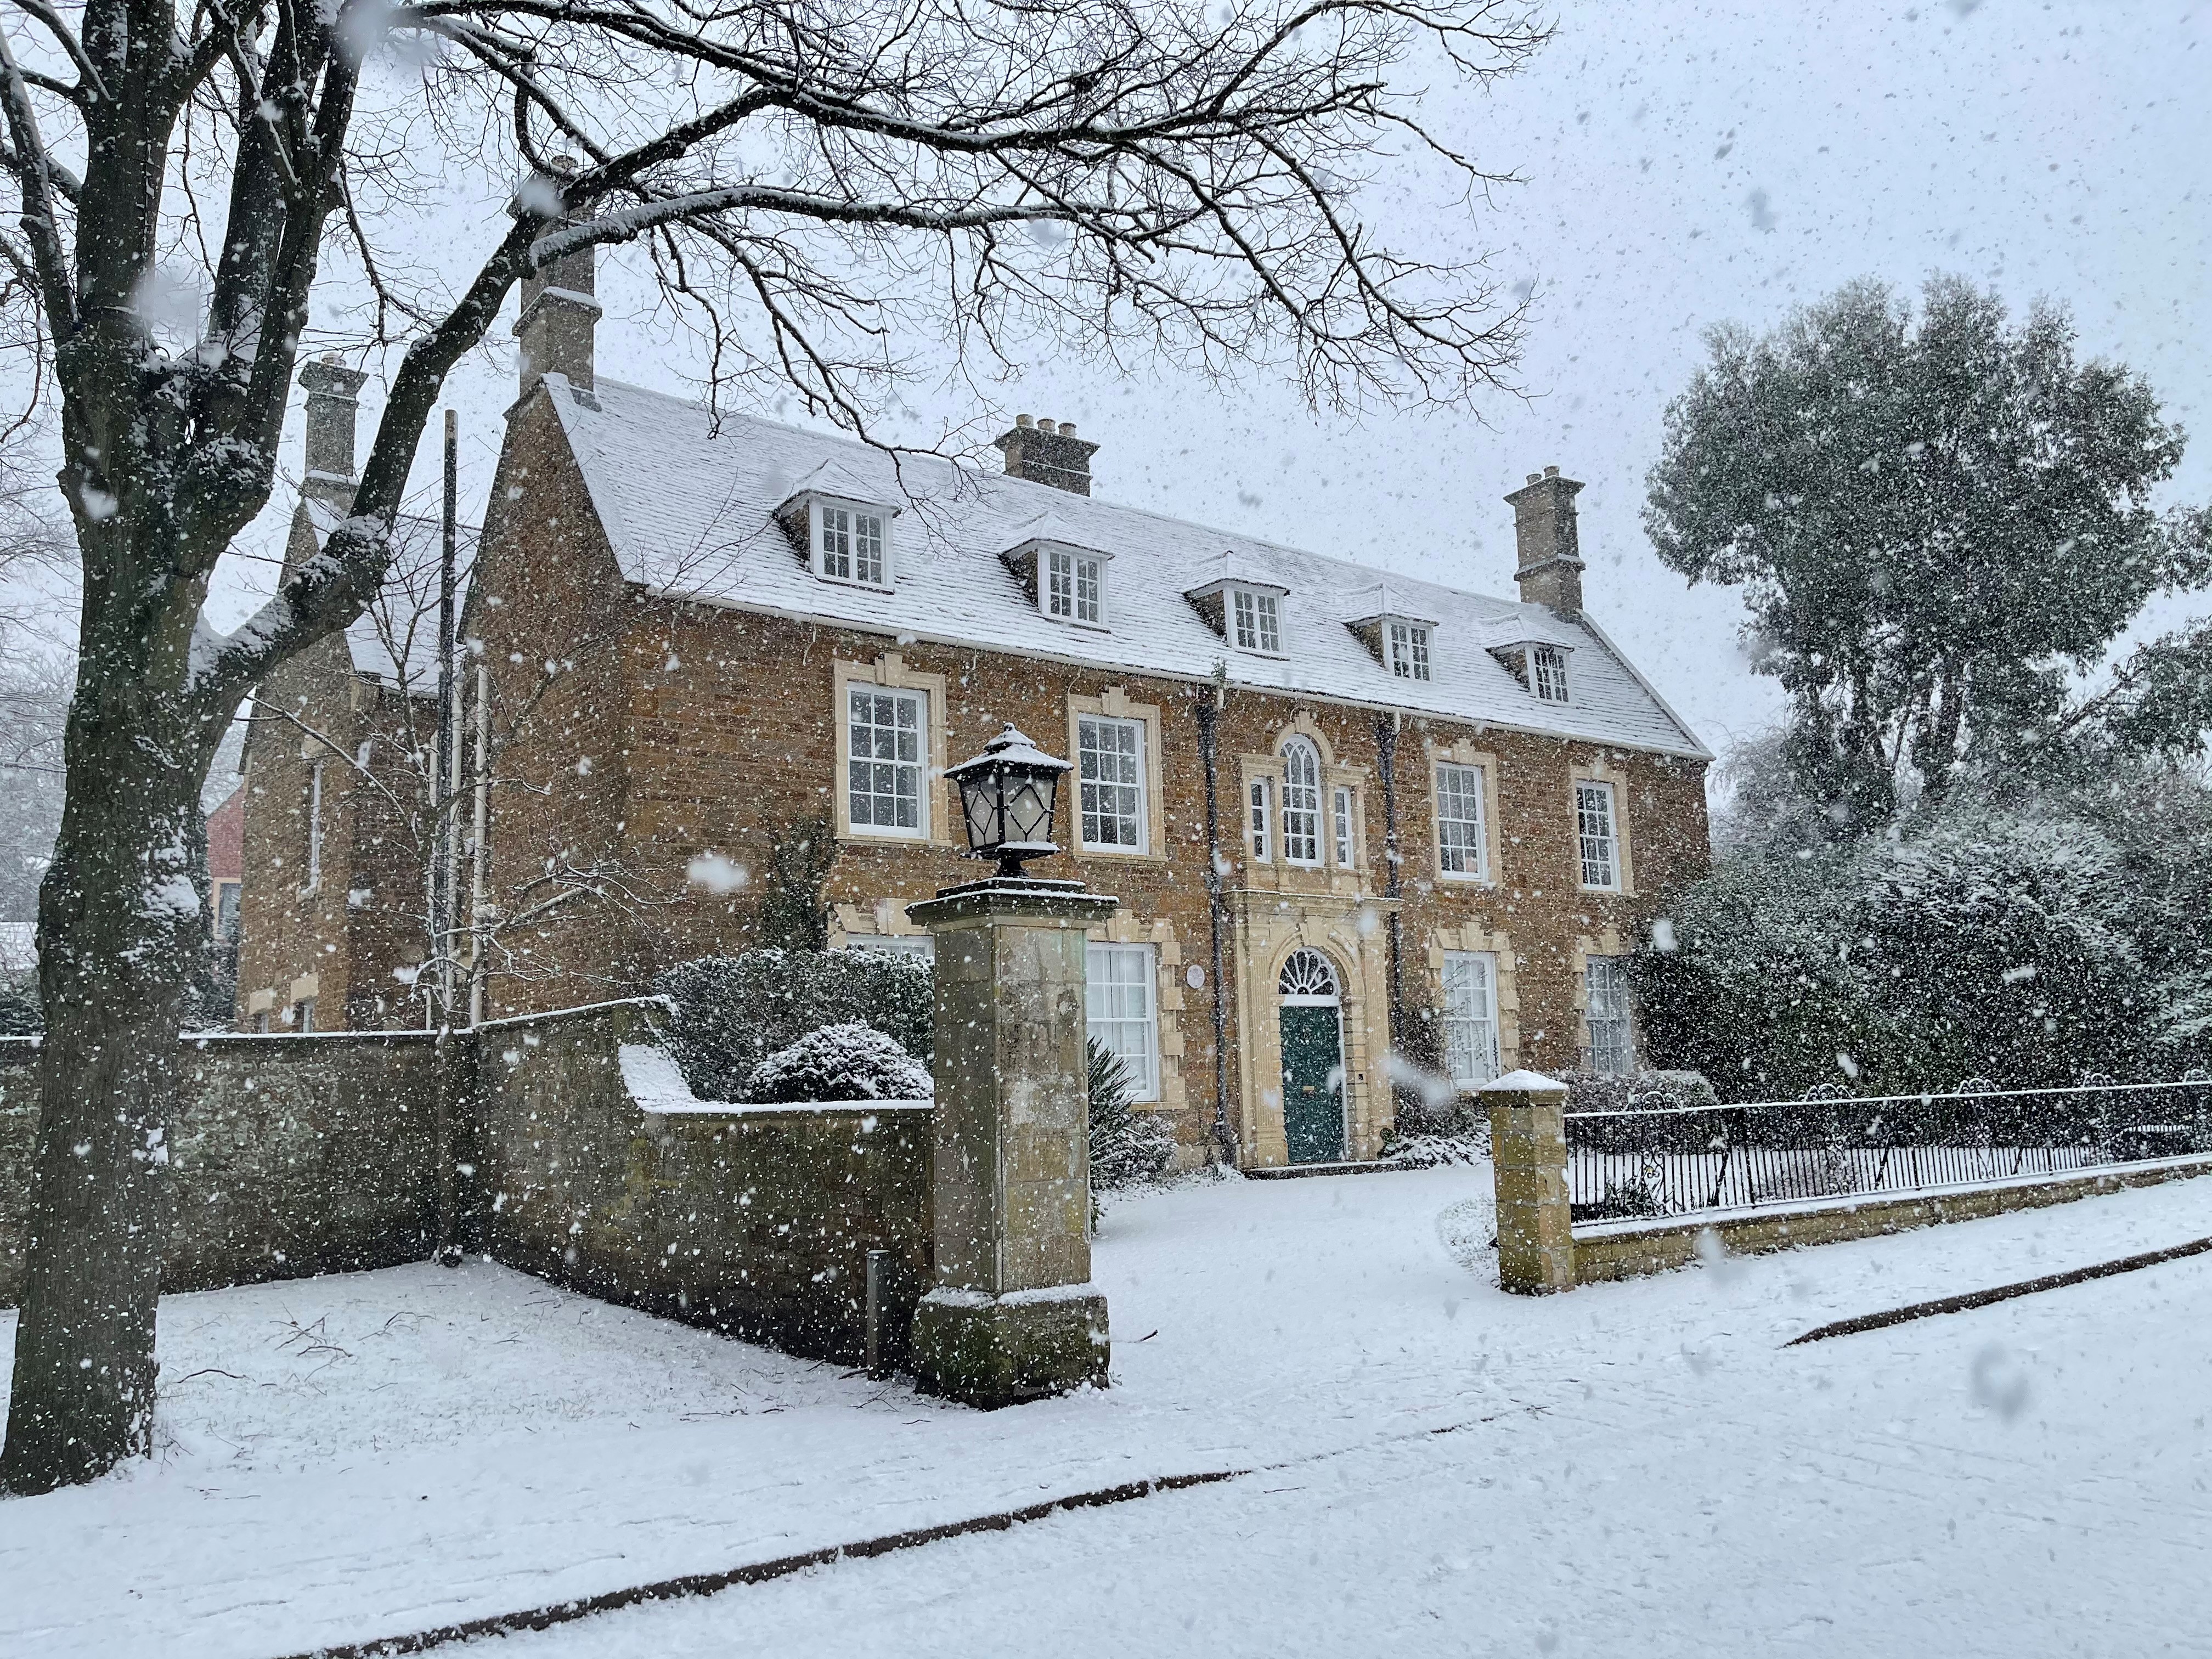 The Manor House in winter